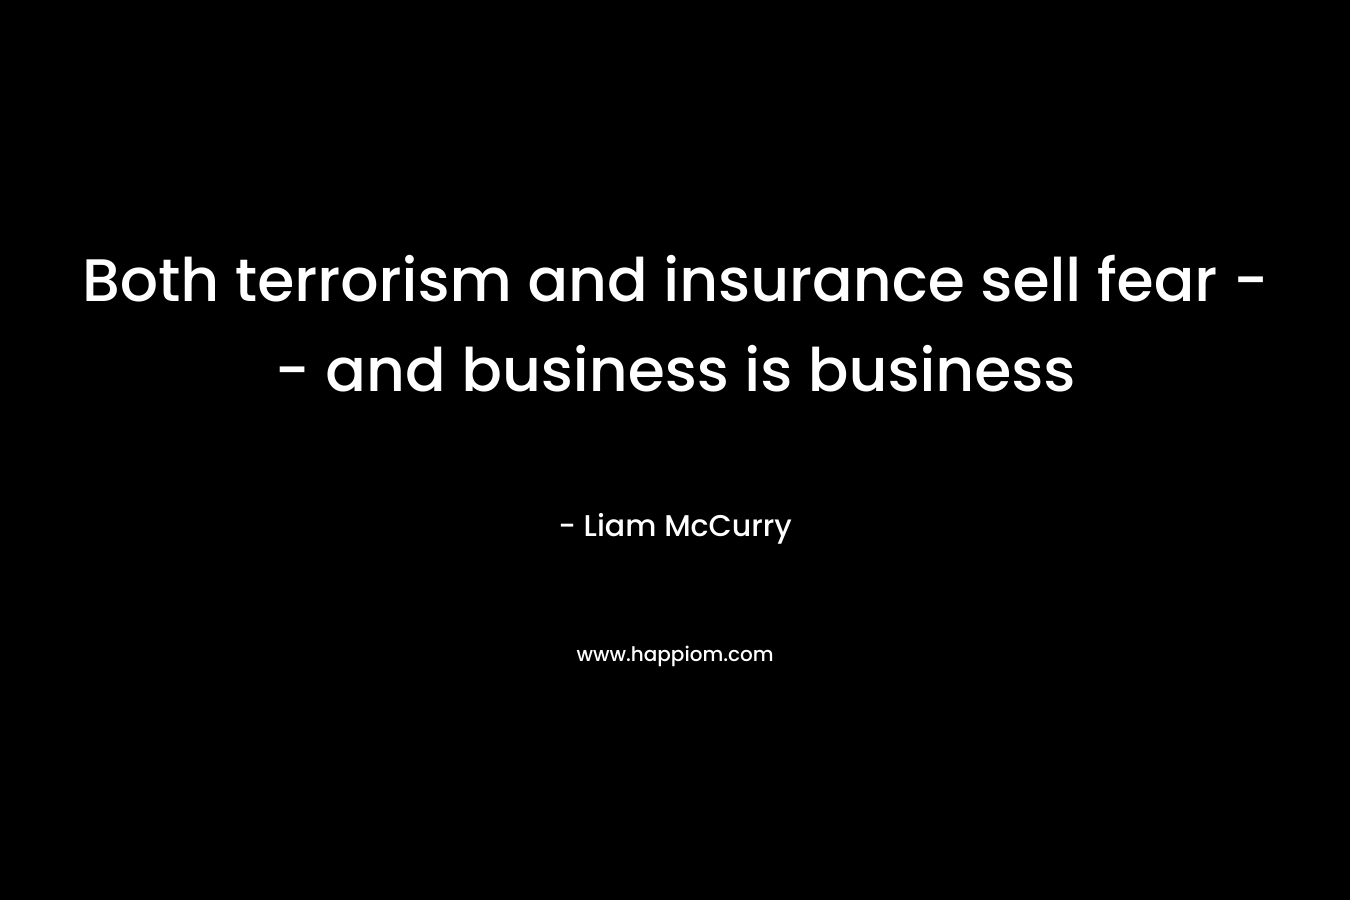 Both terrorism and insurance sell fear -- and business is business